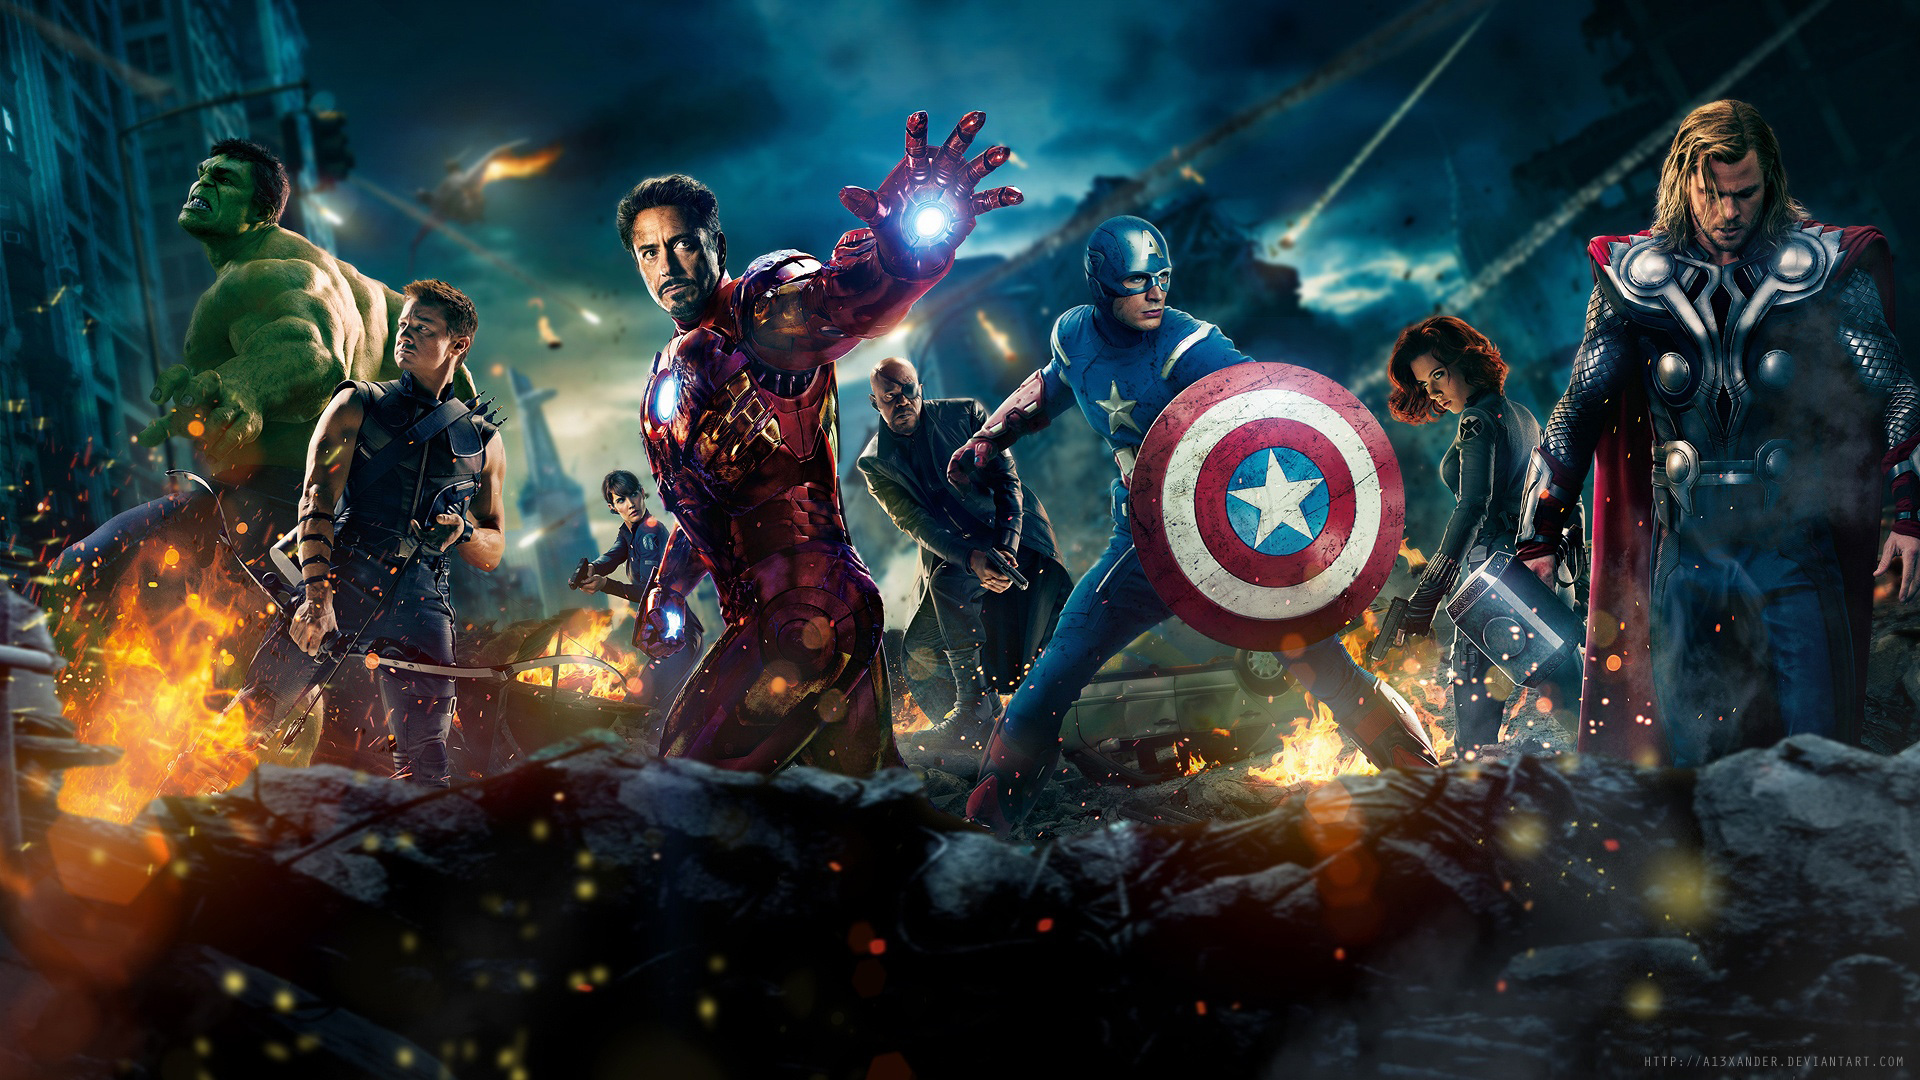 Iron Man Avengers the movie download full hd 1080p wallpaper movie 1920x1080